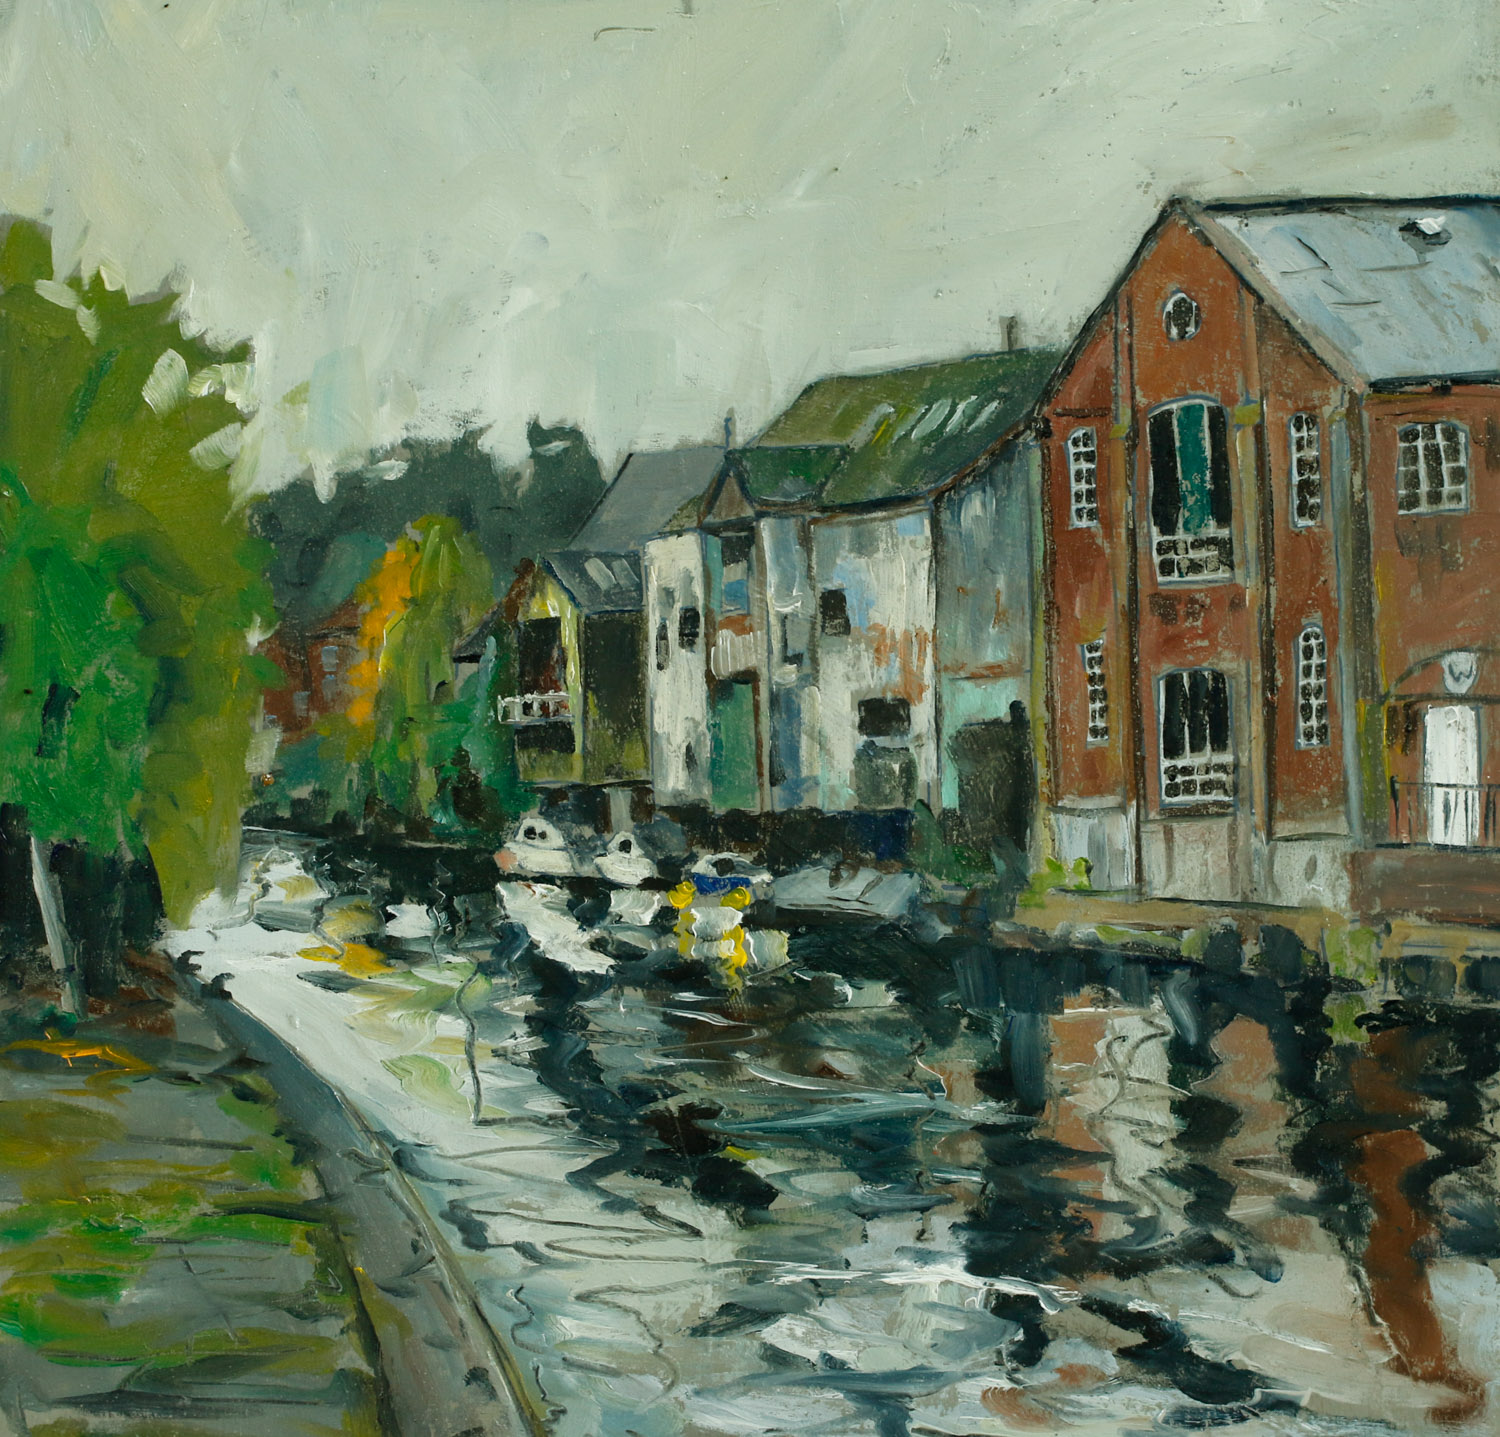 Artist-Brian-Korteling-Waterfront-£400-16x16-Oil-on-Board-at-Paint-Out-Norwich-2015-photo-by-Mark-Ivan-Benfield-6270-1